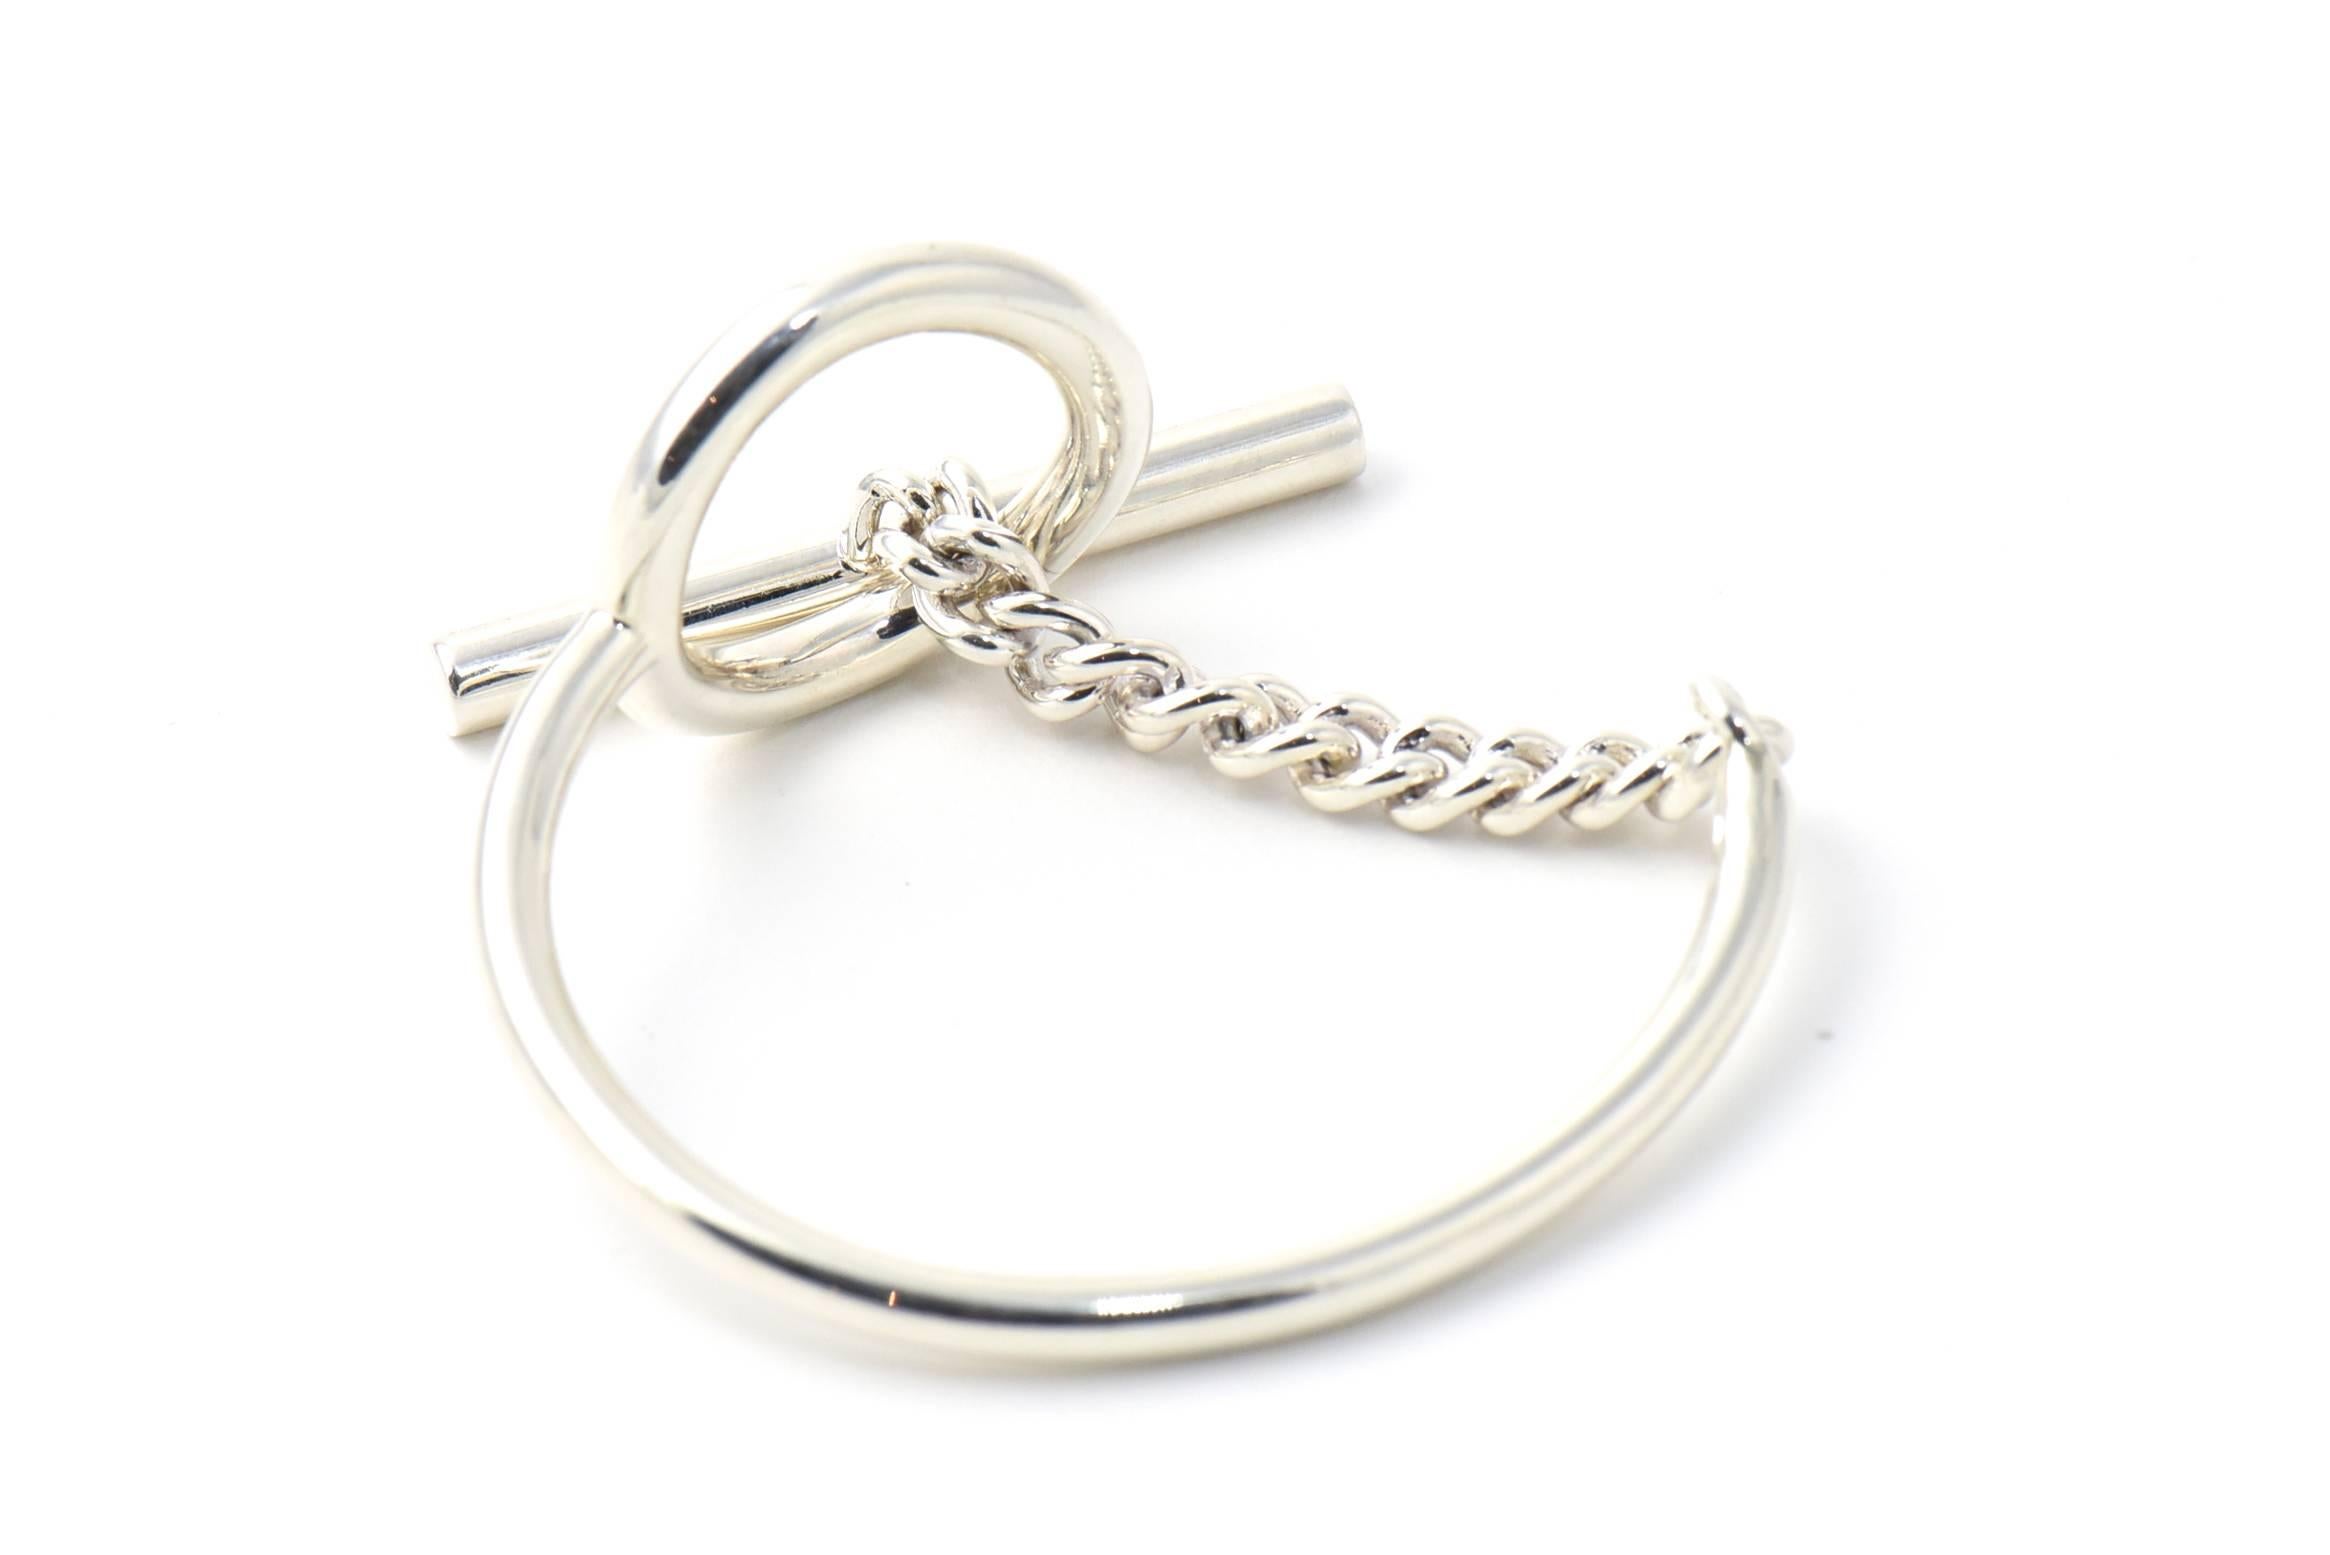 Croisette silver toggle bracelet
Hermes bracelet in silver, size MM, 6.1'' long
Silver 925/1000

Retaill is $1,200.00

No bag or box

